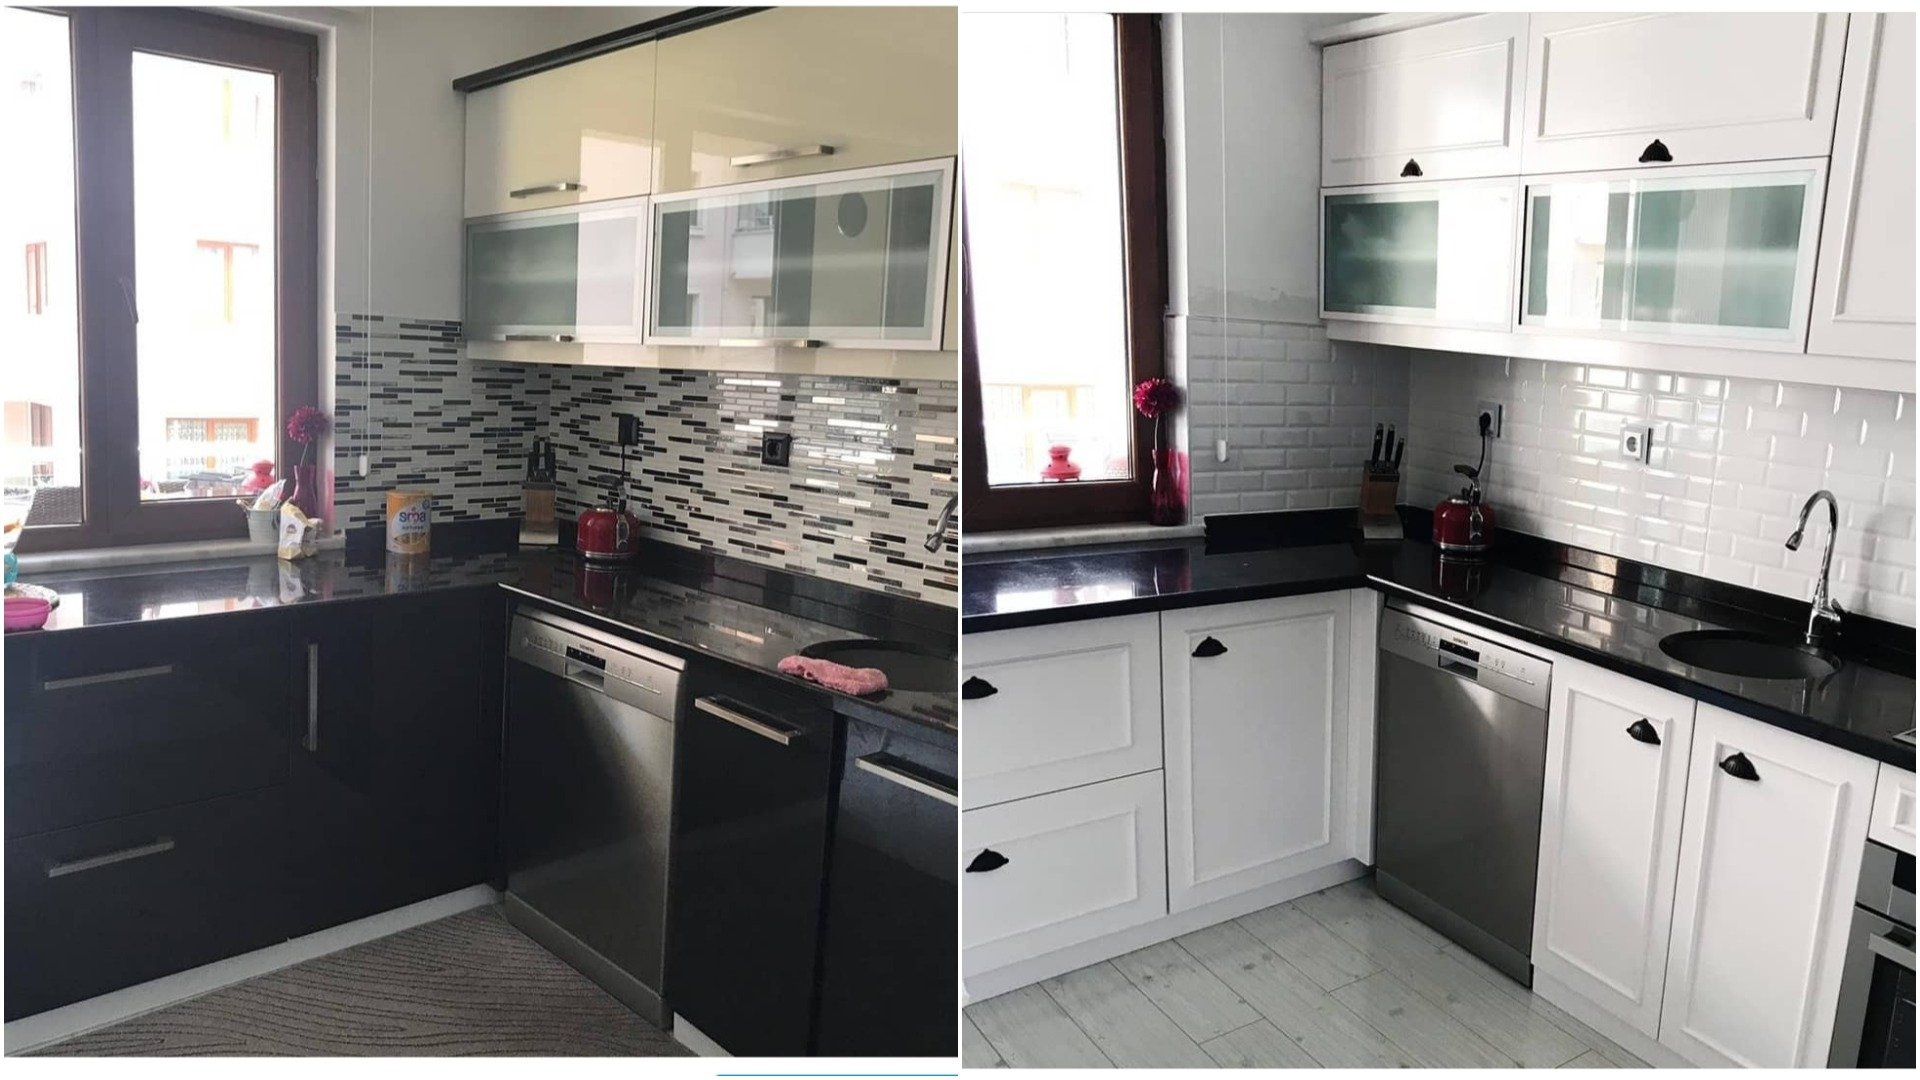 A before and after collage shows a kitchen cabinet renovation project. (Photos courtesy of Tacihan Yongacı)